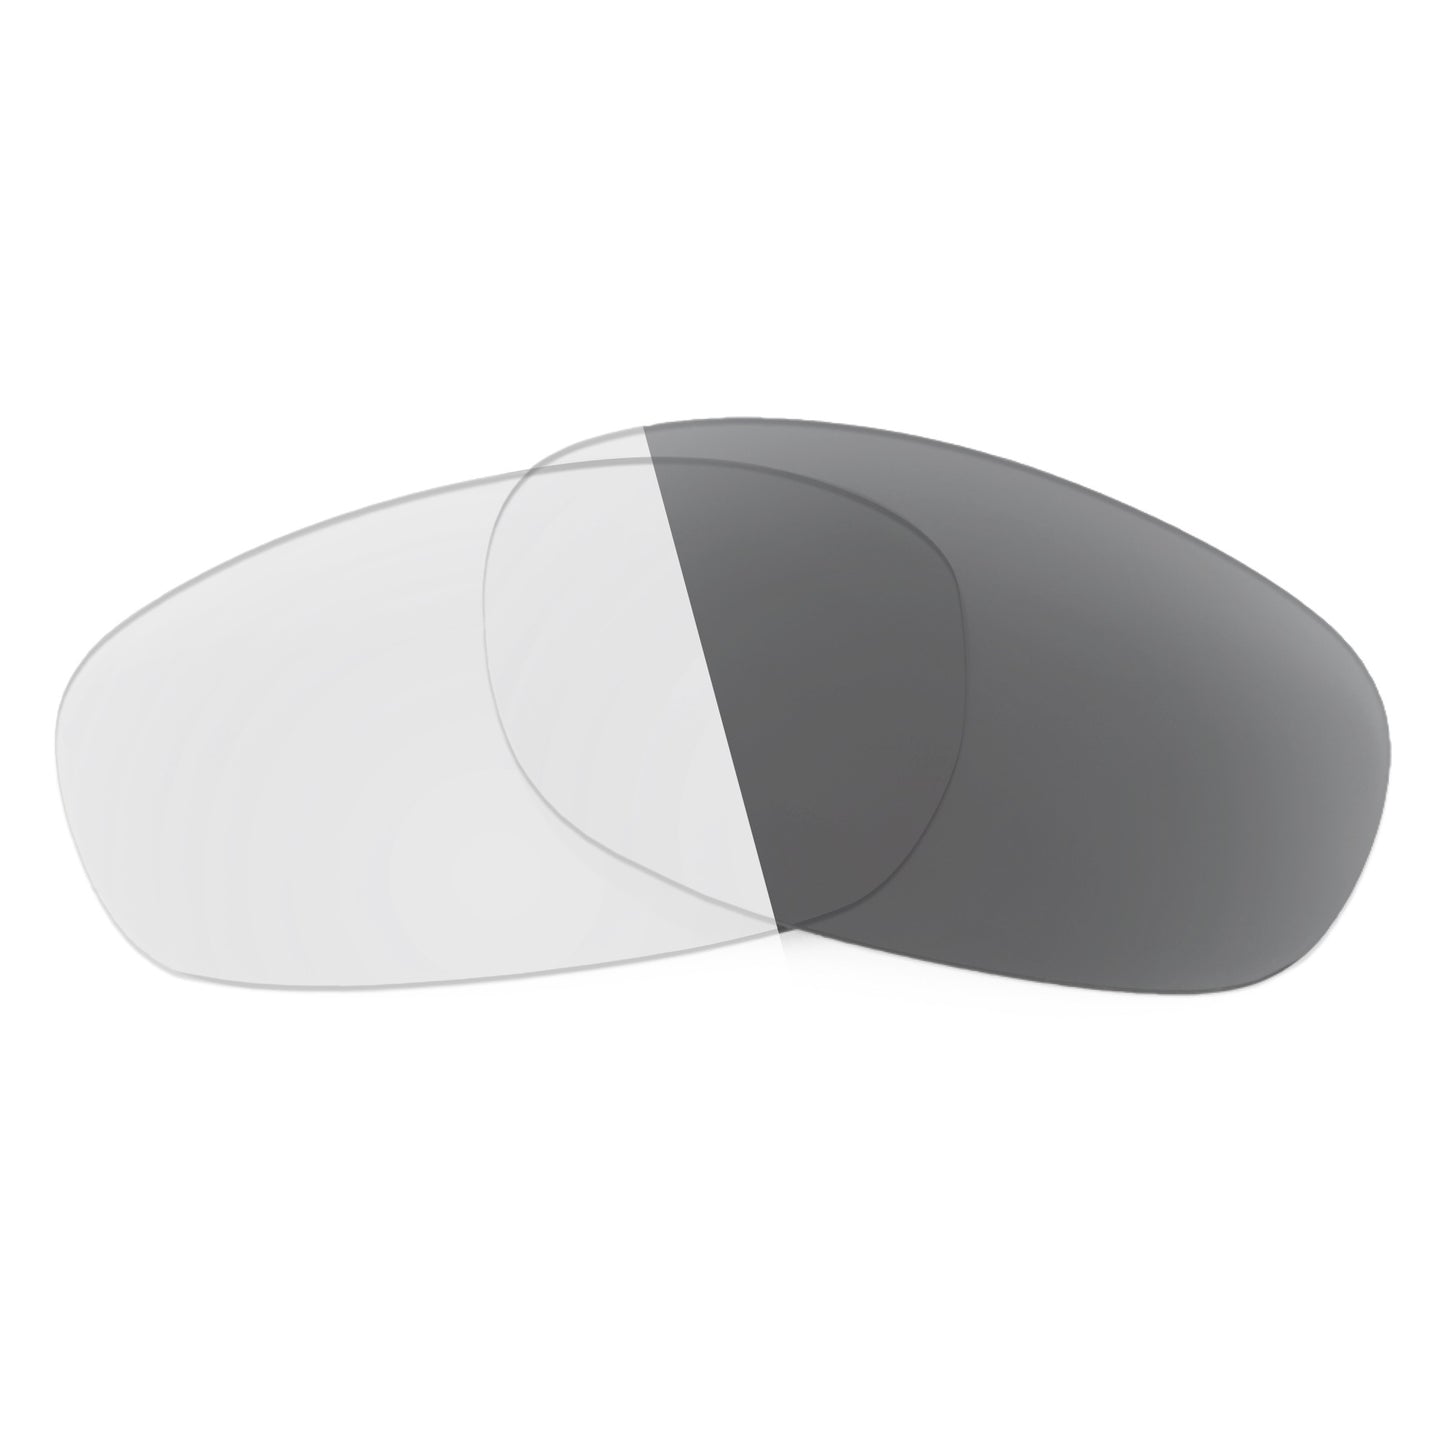 Revant replacement lenses for Ray-Ban Downtown RB3168 56mm Non-Polarized Adapt Gray Photochromic